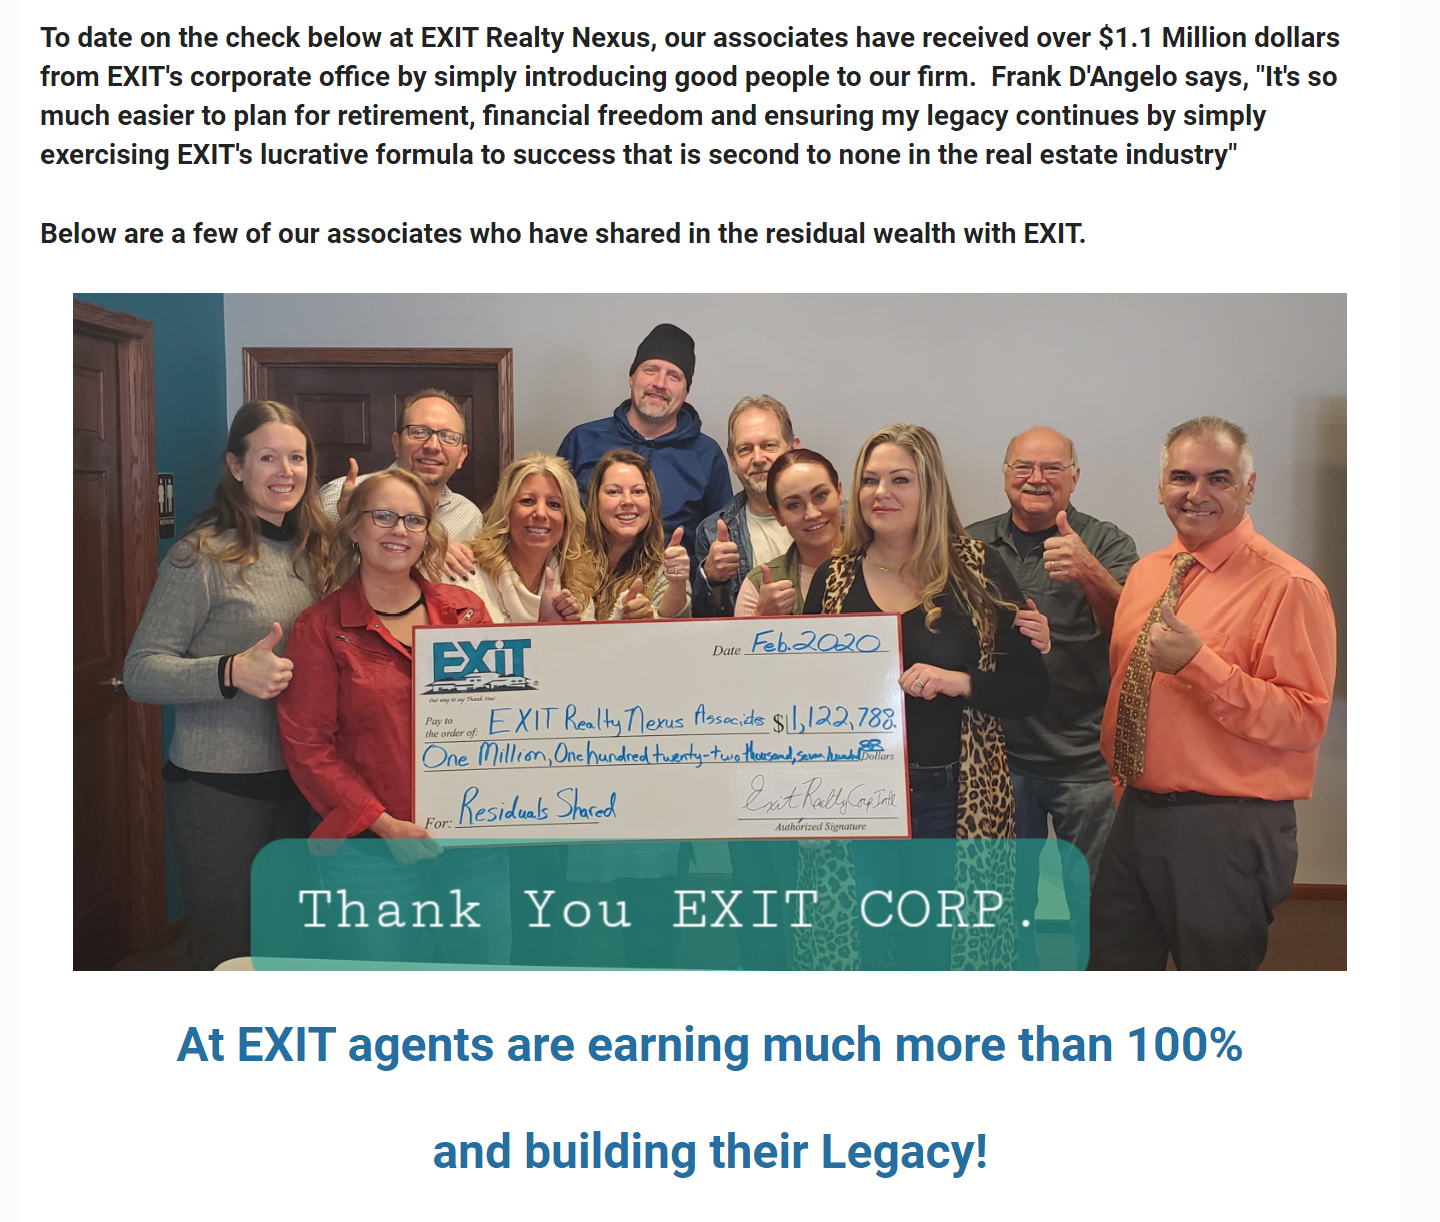 EXIT Realty Nexus has paid out over $1 Million Dollars in residual income!